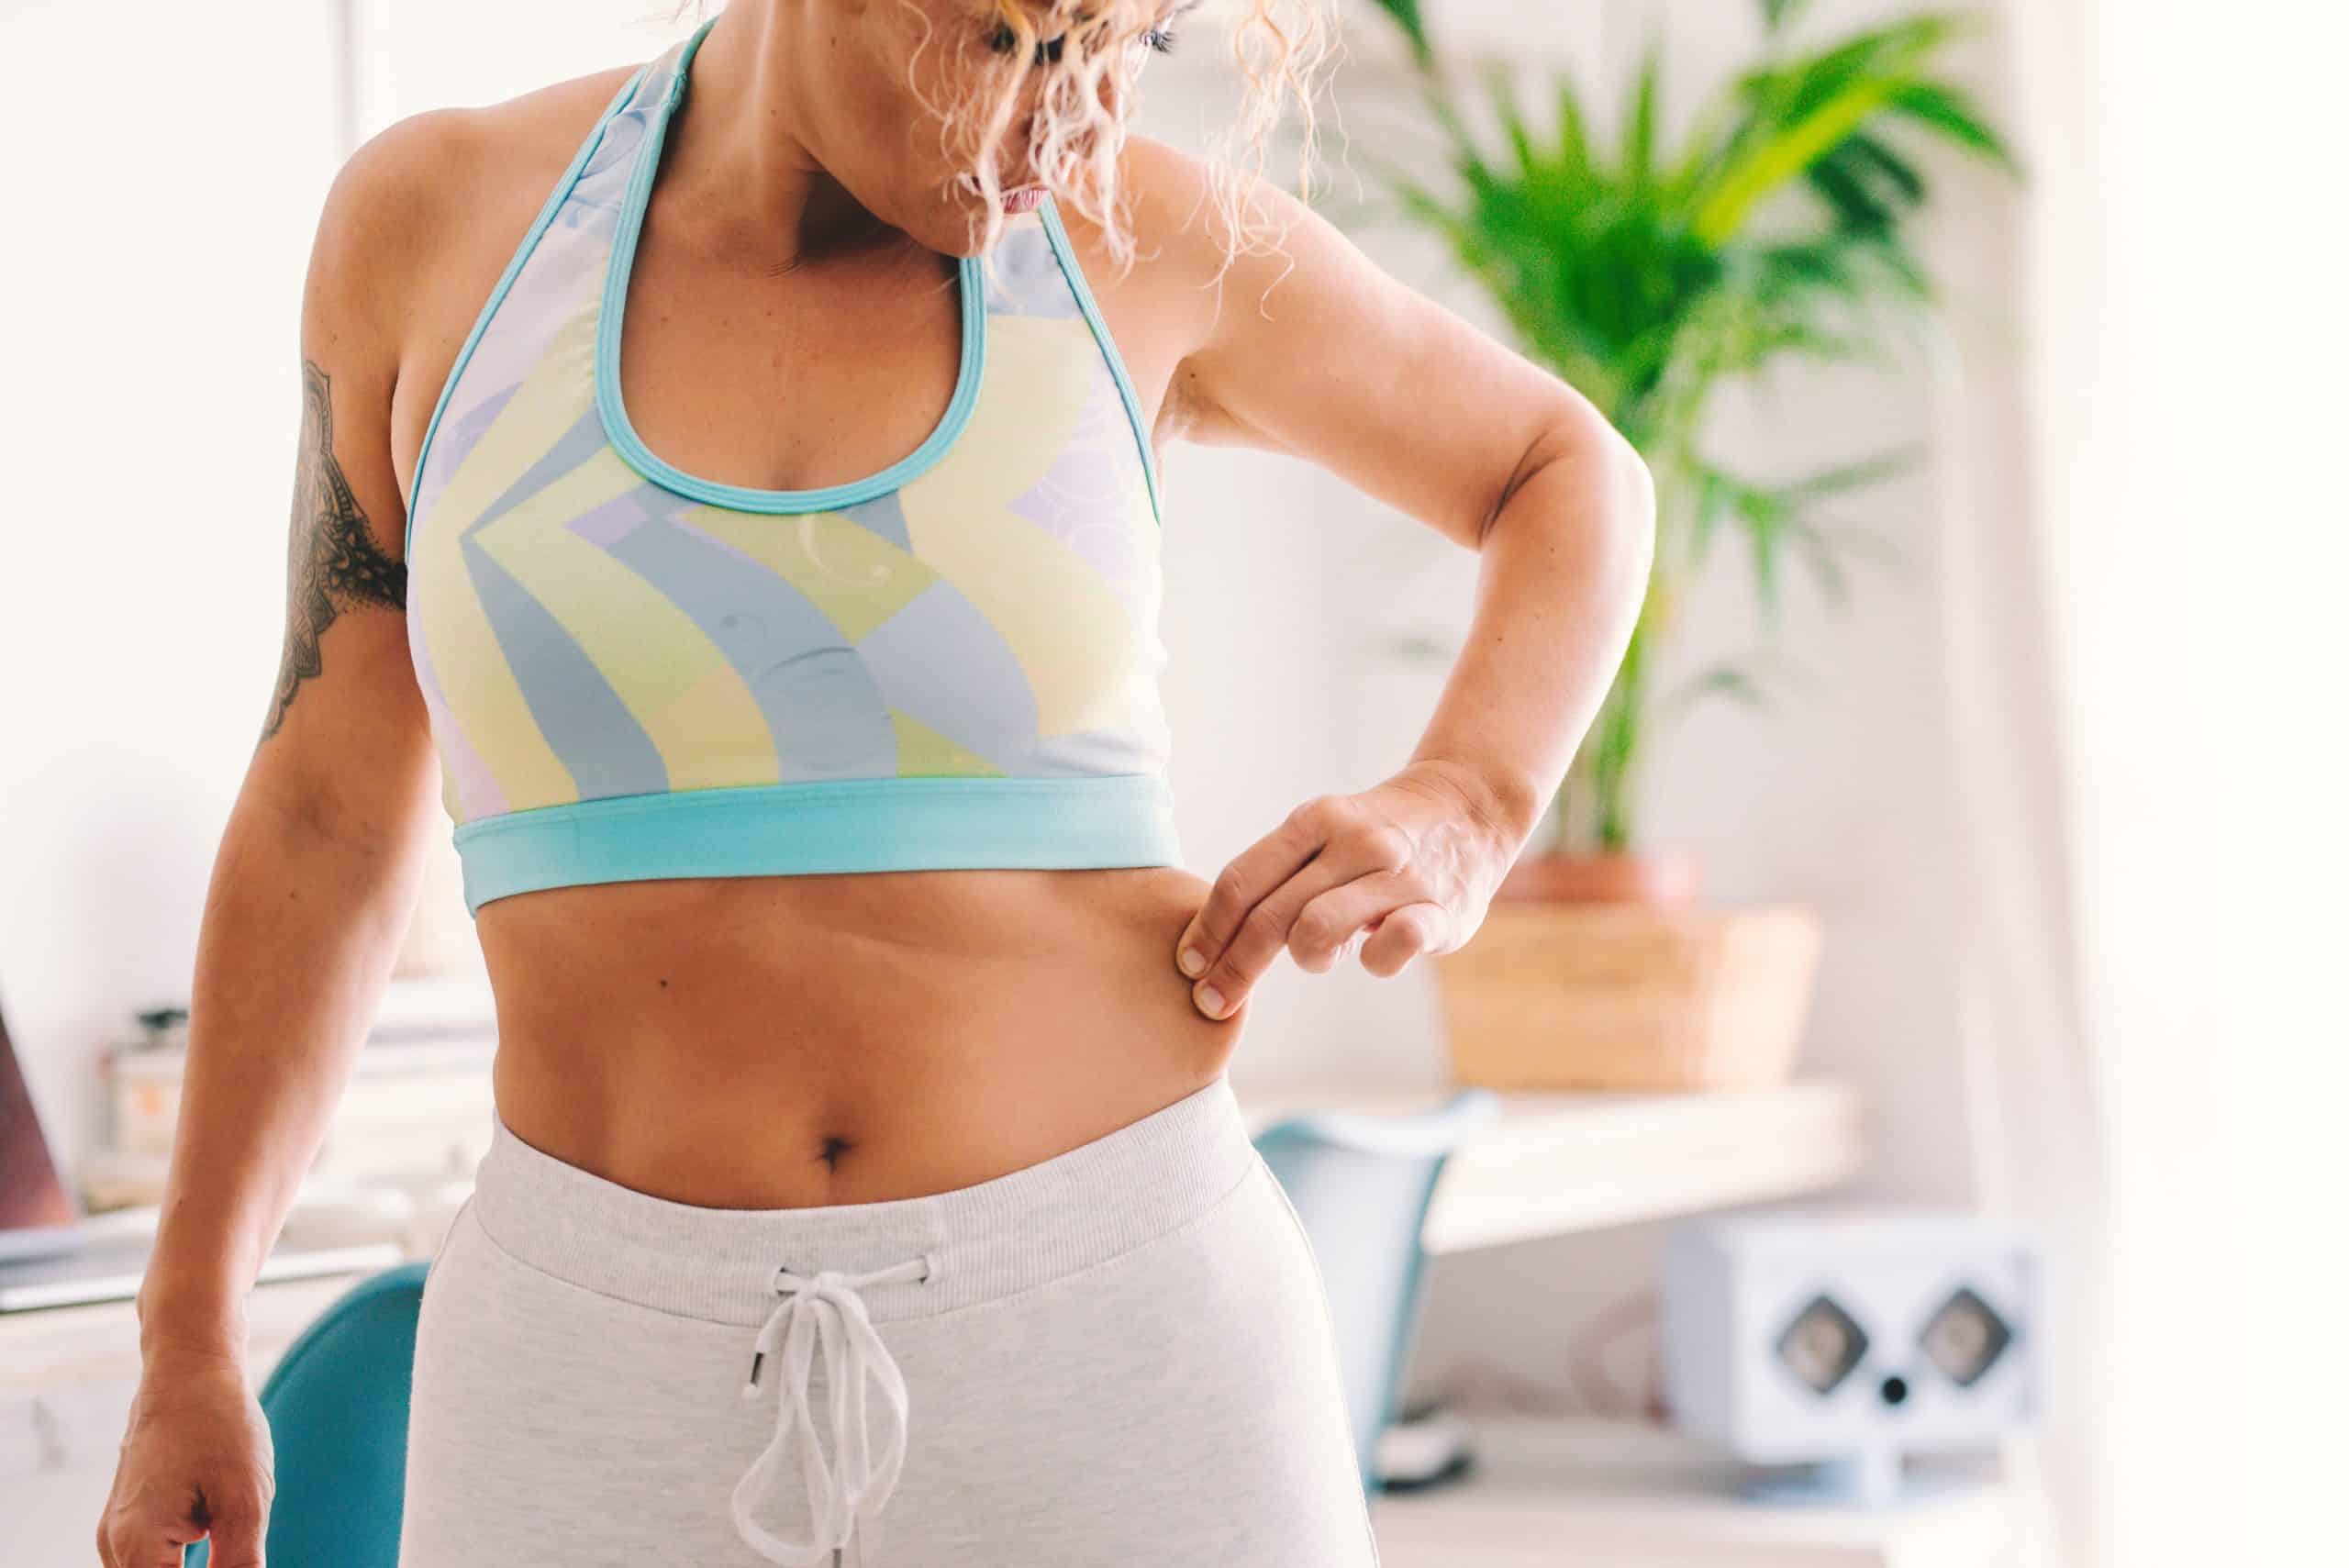 How To Get A Smaller Waist: Tips For Burning Belly Fat And Toning